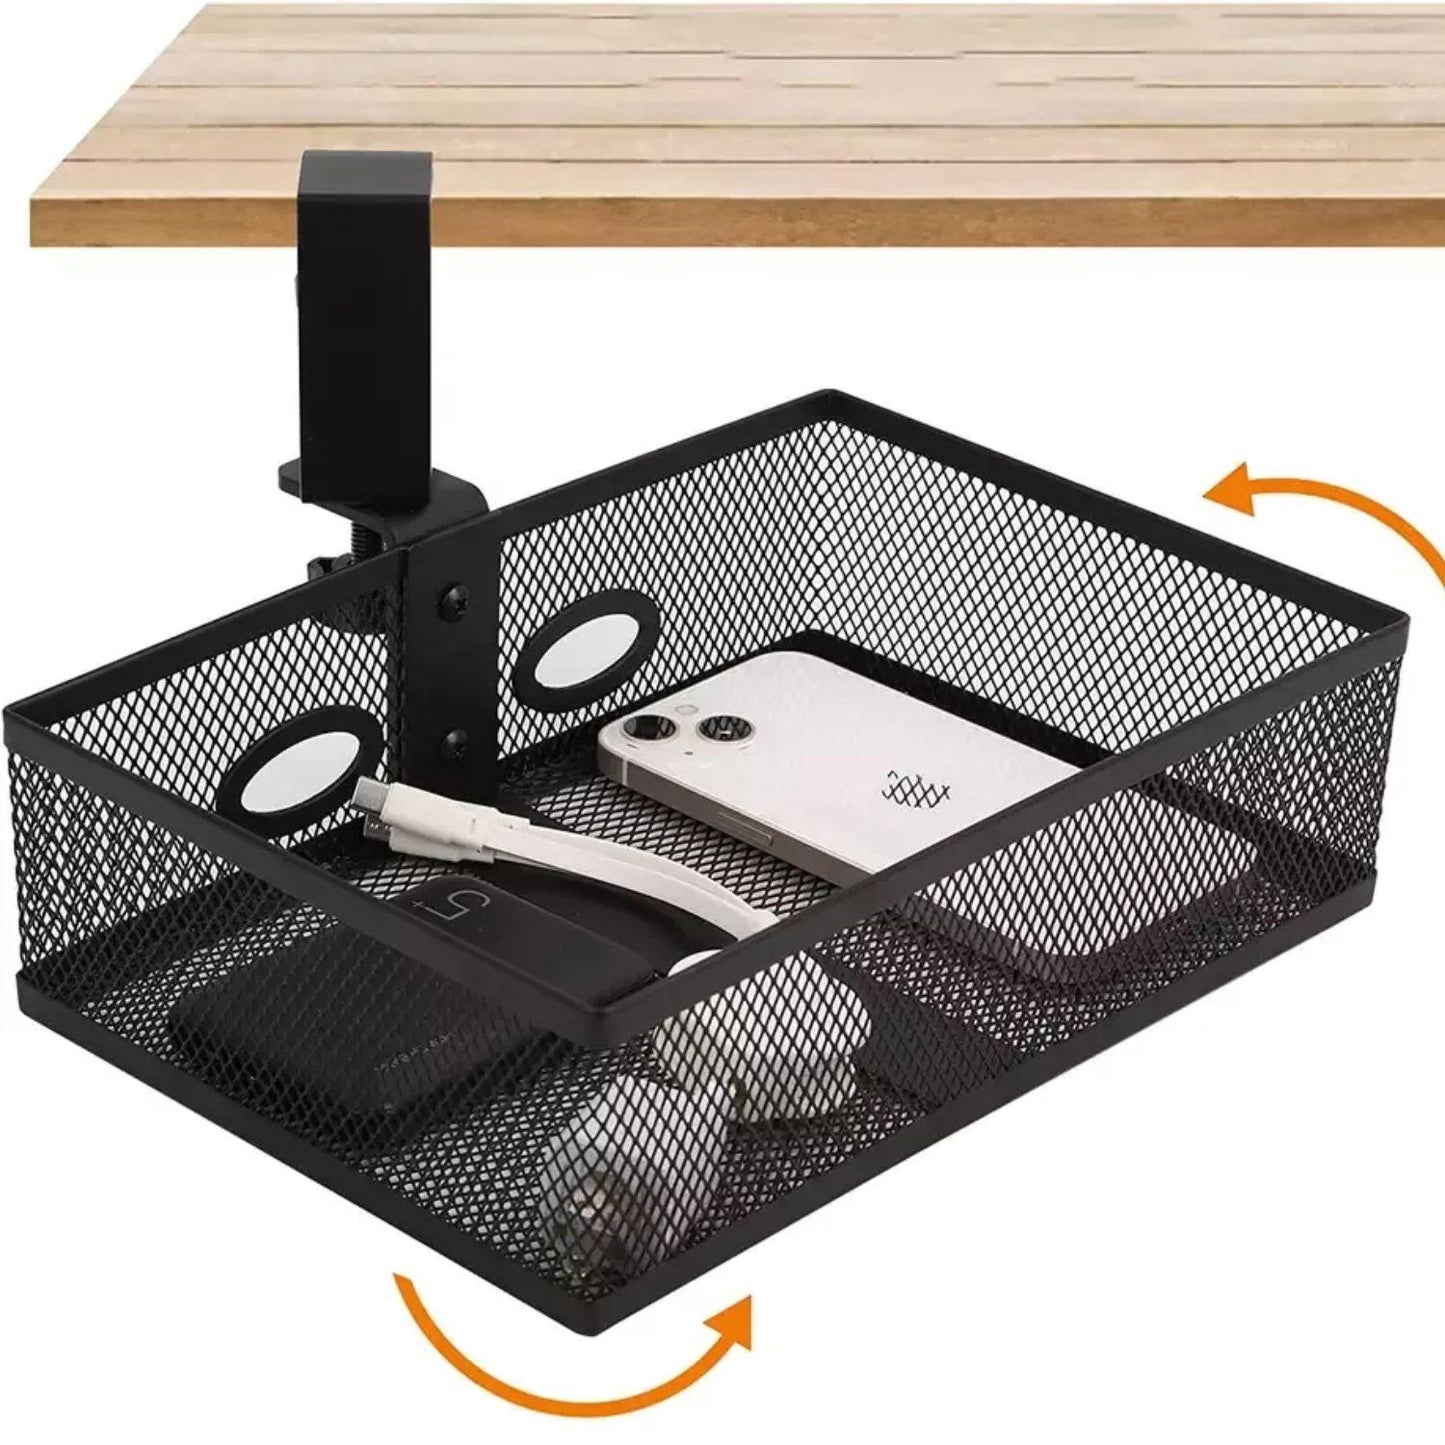 Swivel Cable Management Tray Organizer Under Desk for Office and Home No Drill - GADGET WAGON Desk Arm